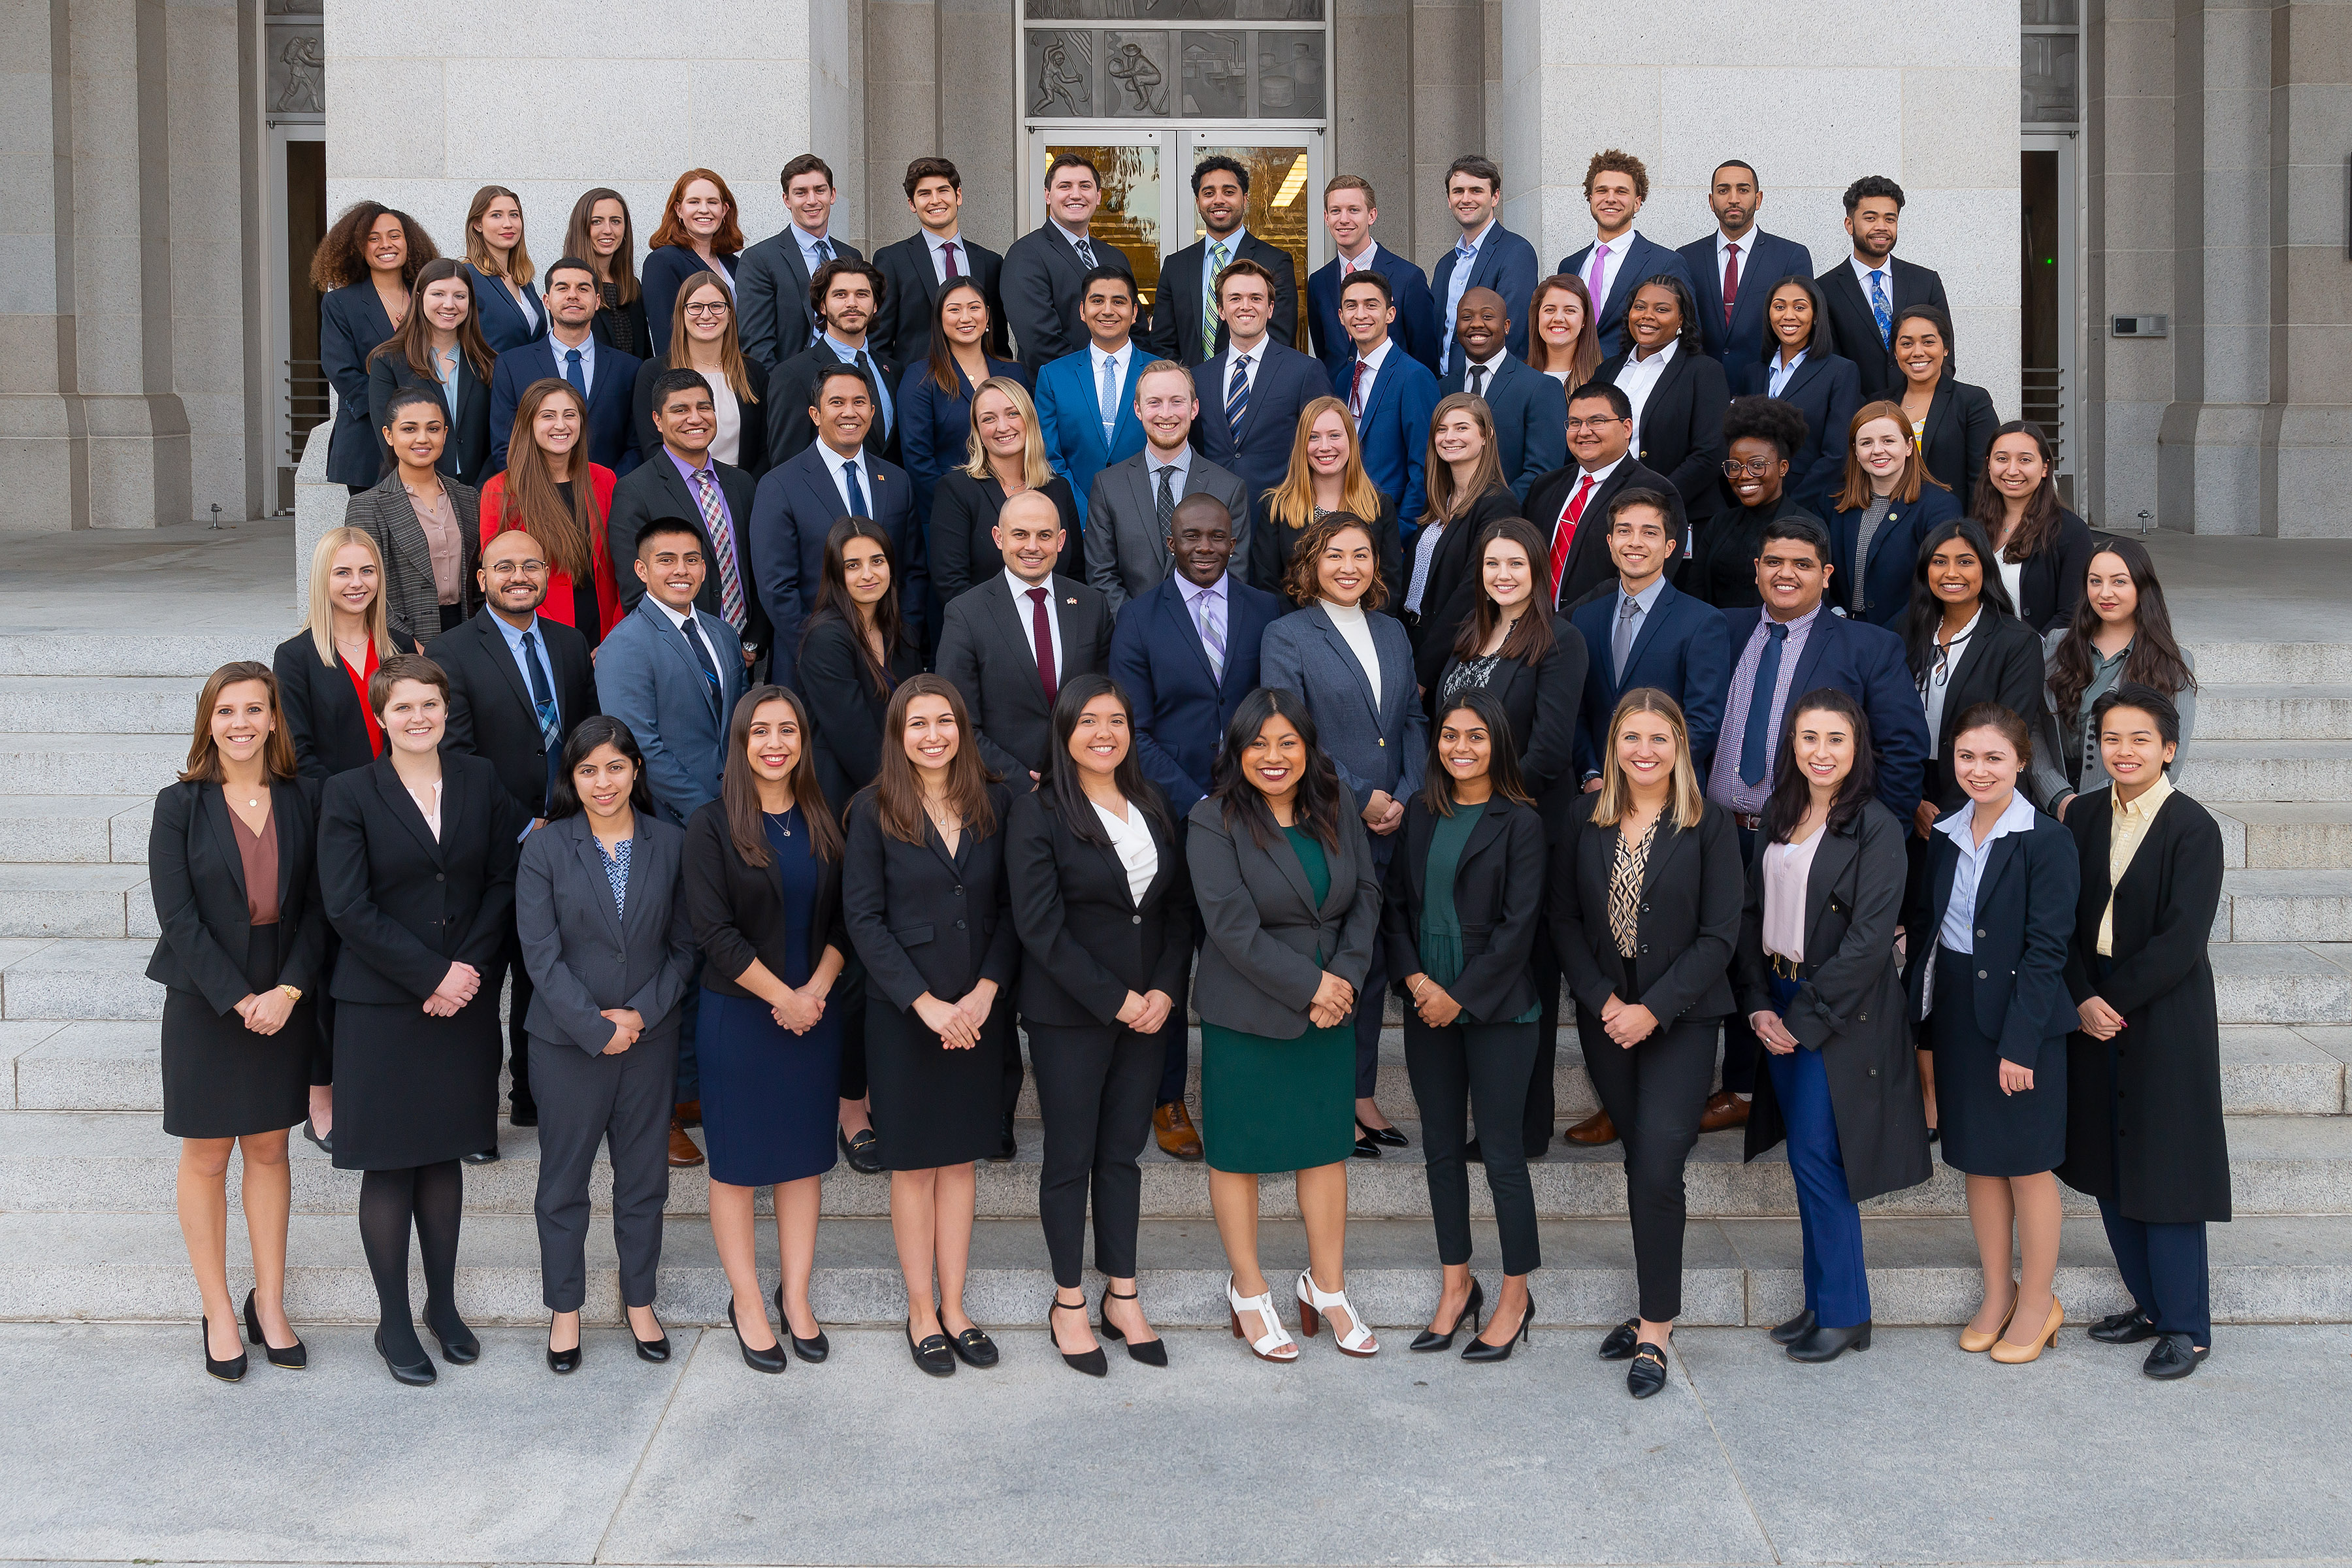 A group shot of all the 2019-20 Capitol Fellows participants